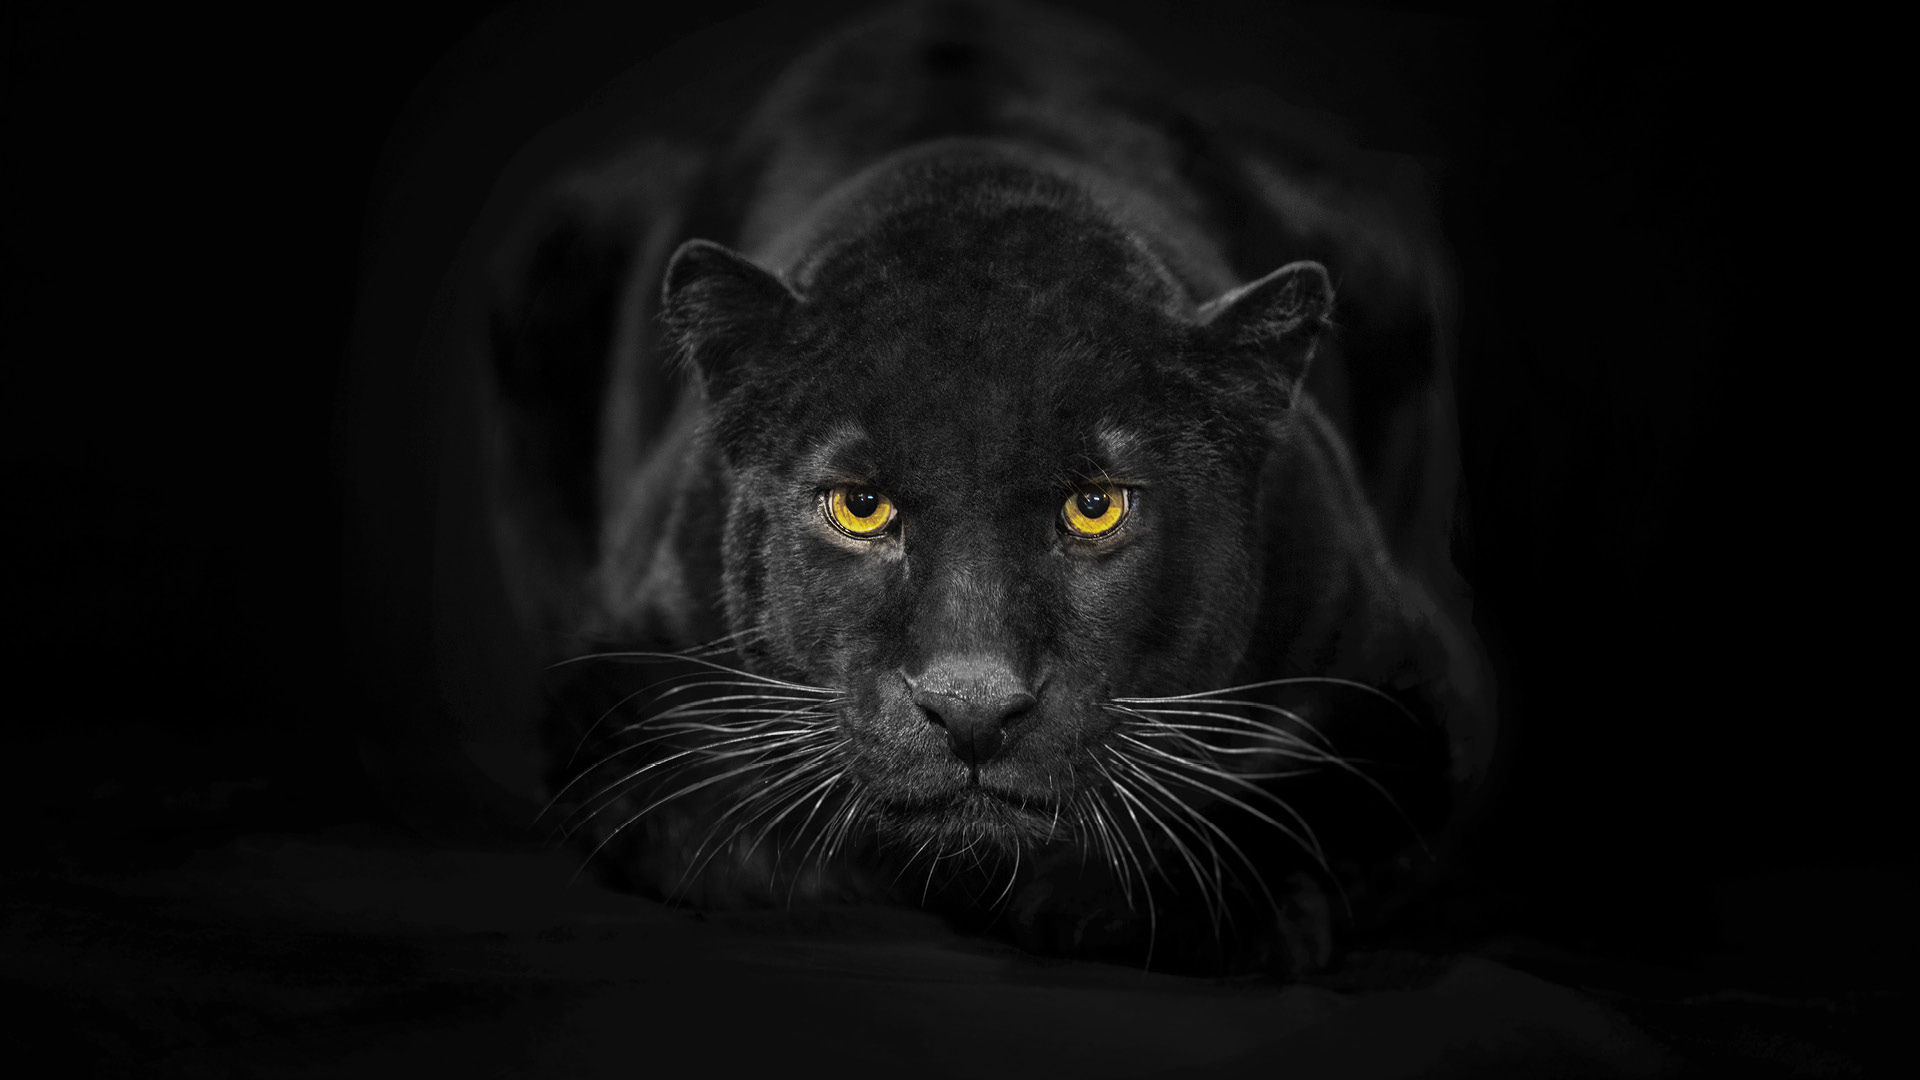 Stop Everything To See These Stunning Images Of A Black Panther!